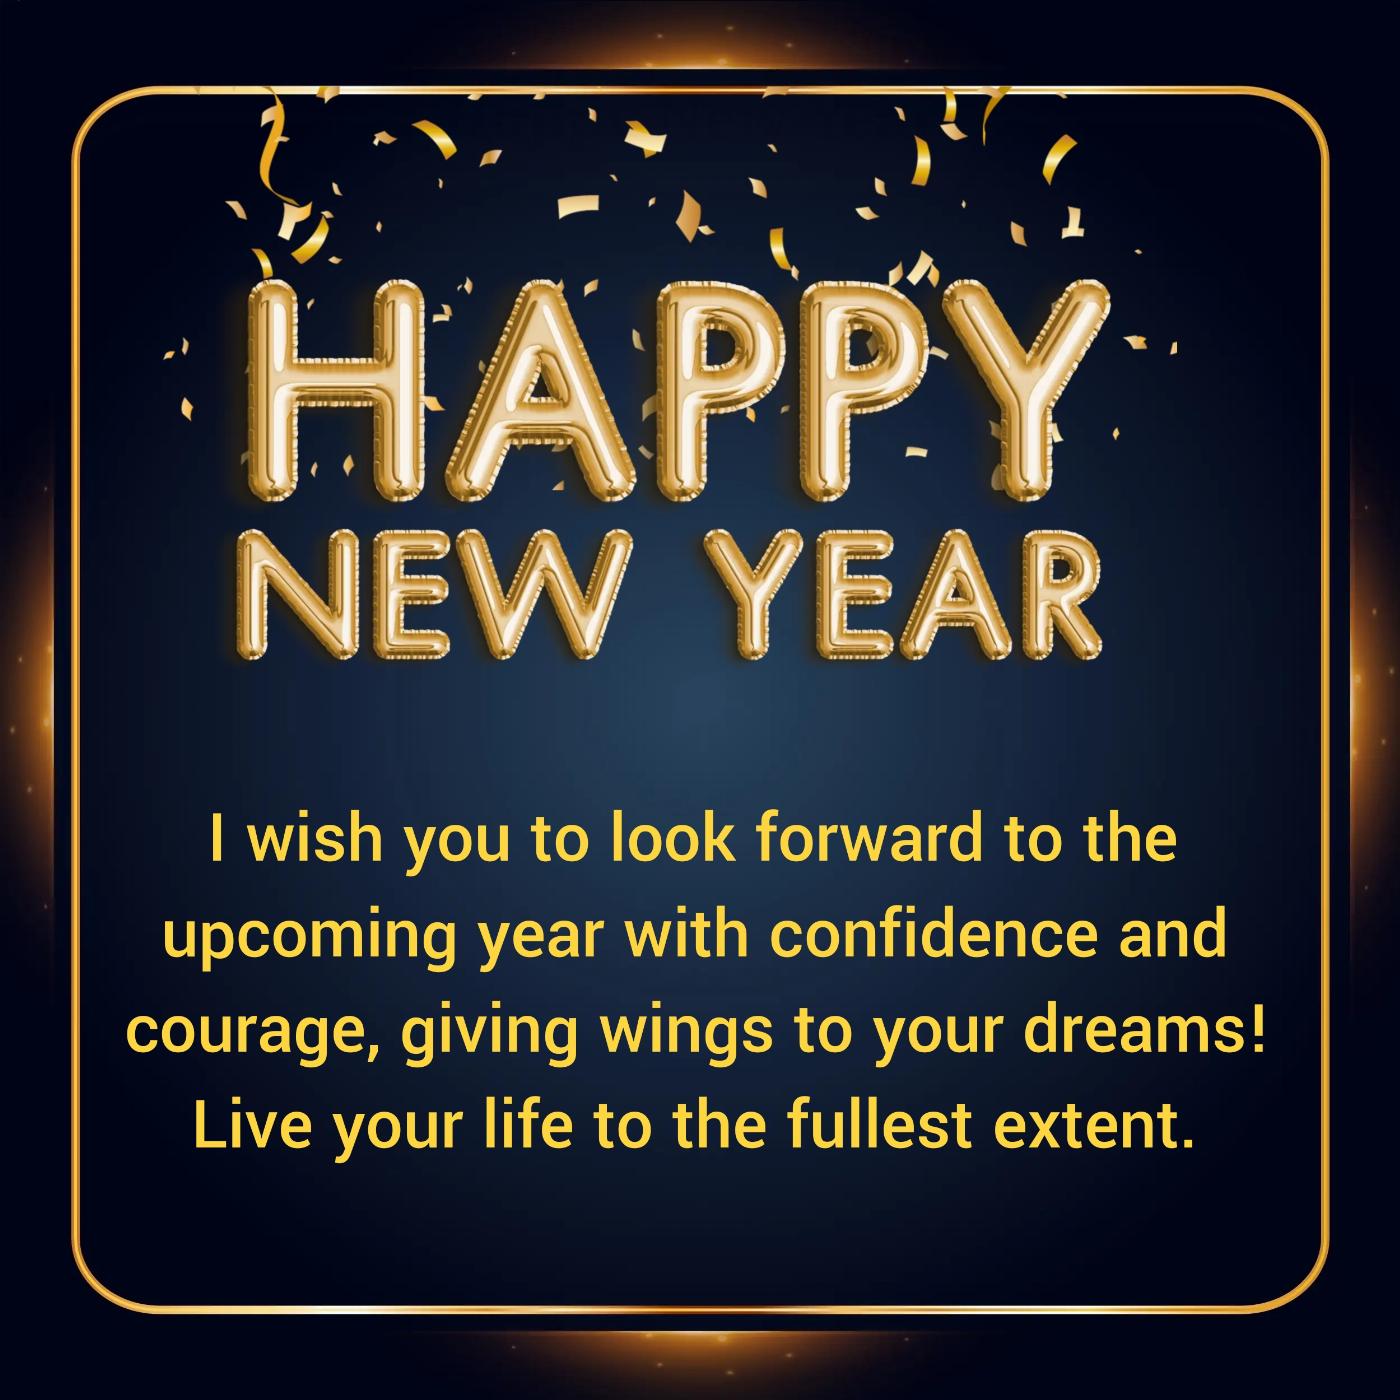 I wish you to look forward to the upcoming year with confidence